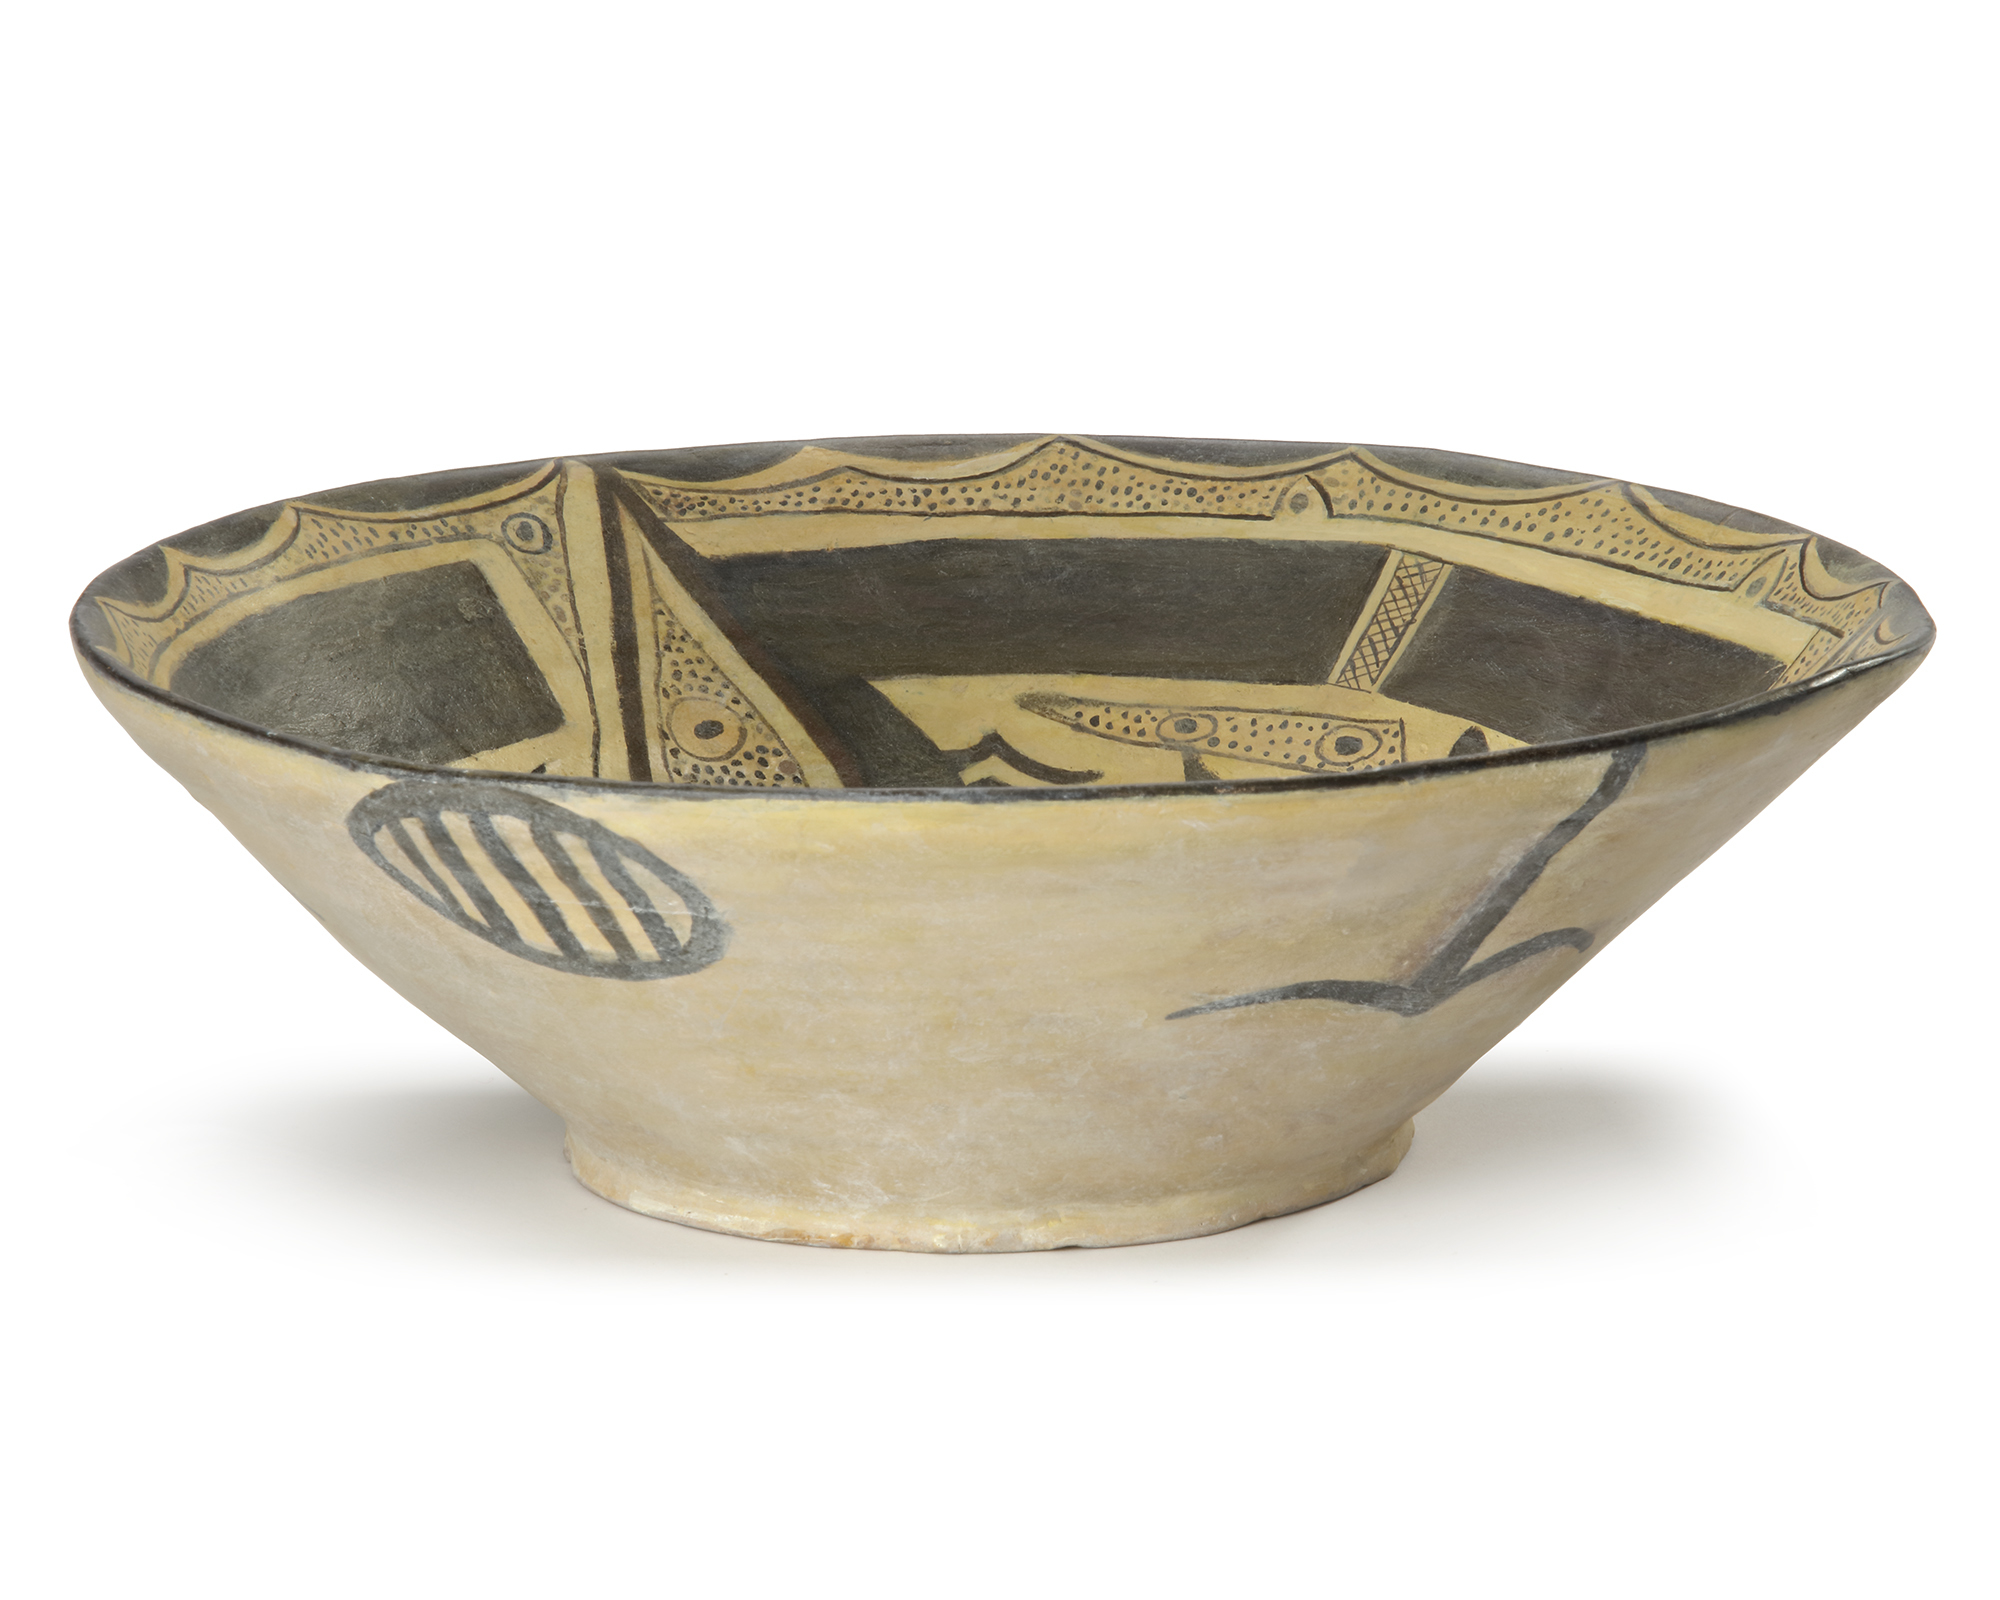 A NISHAPUR POTTERY BOWL, EASTERN PERSIA, 10TH CENTURY - Image 5 of 10